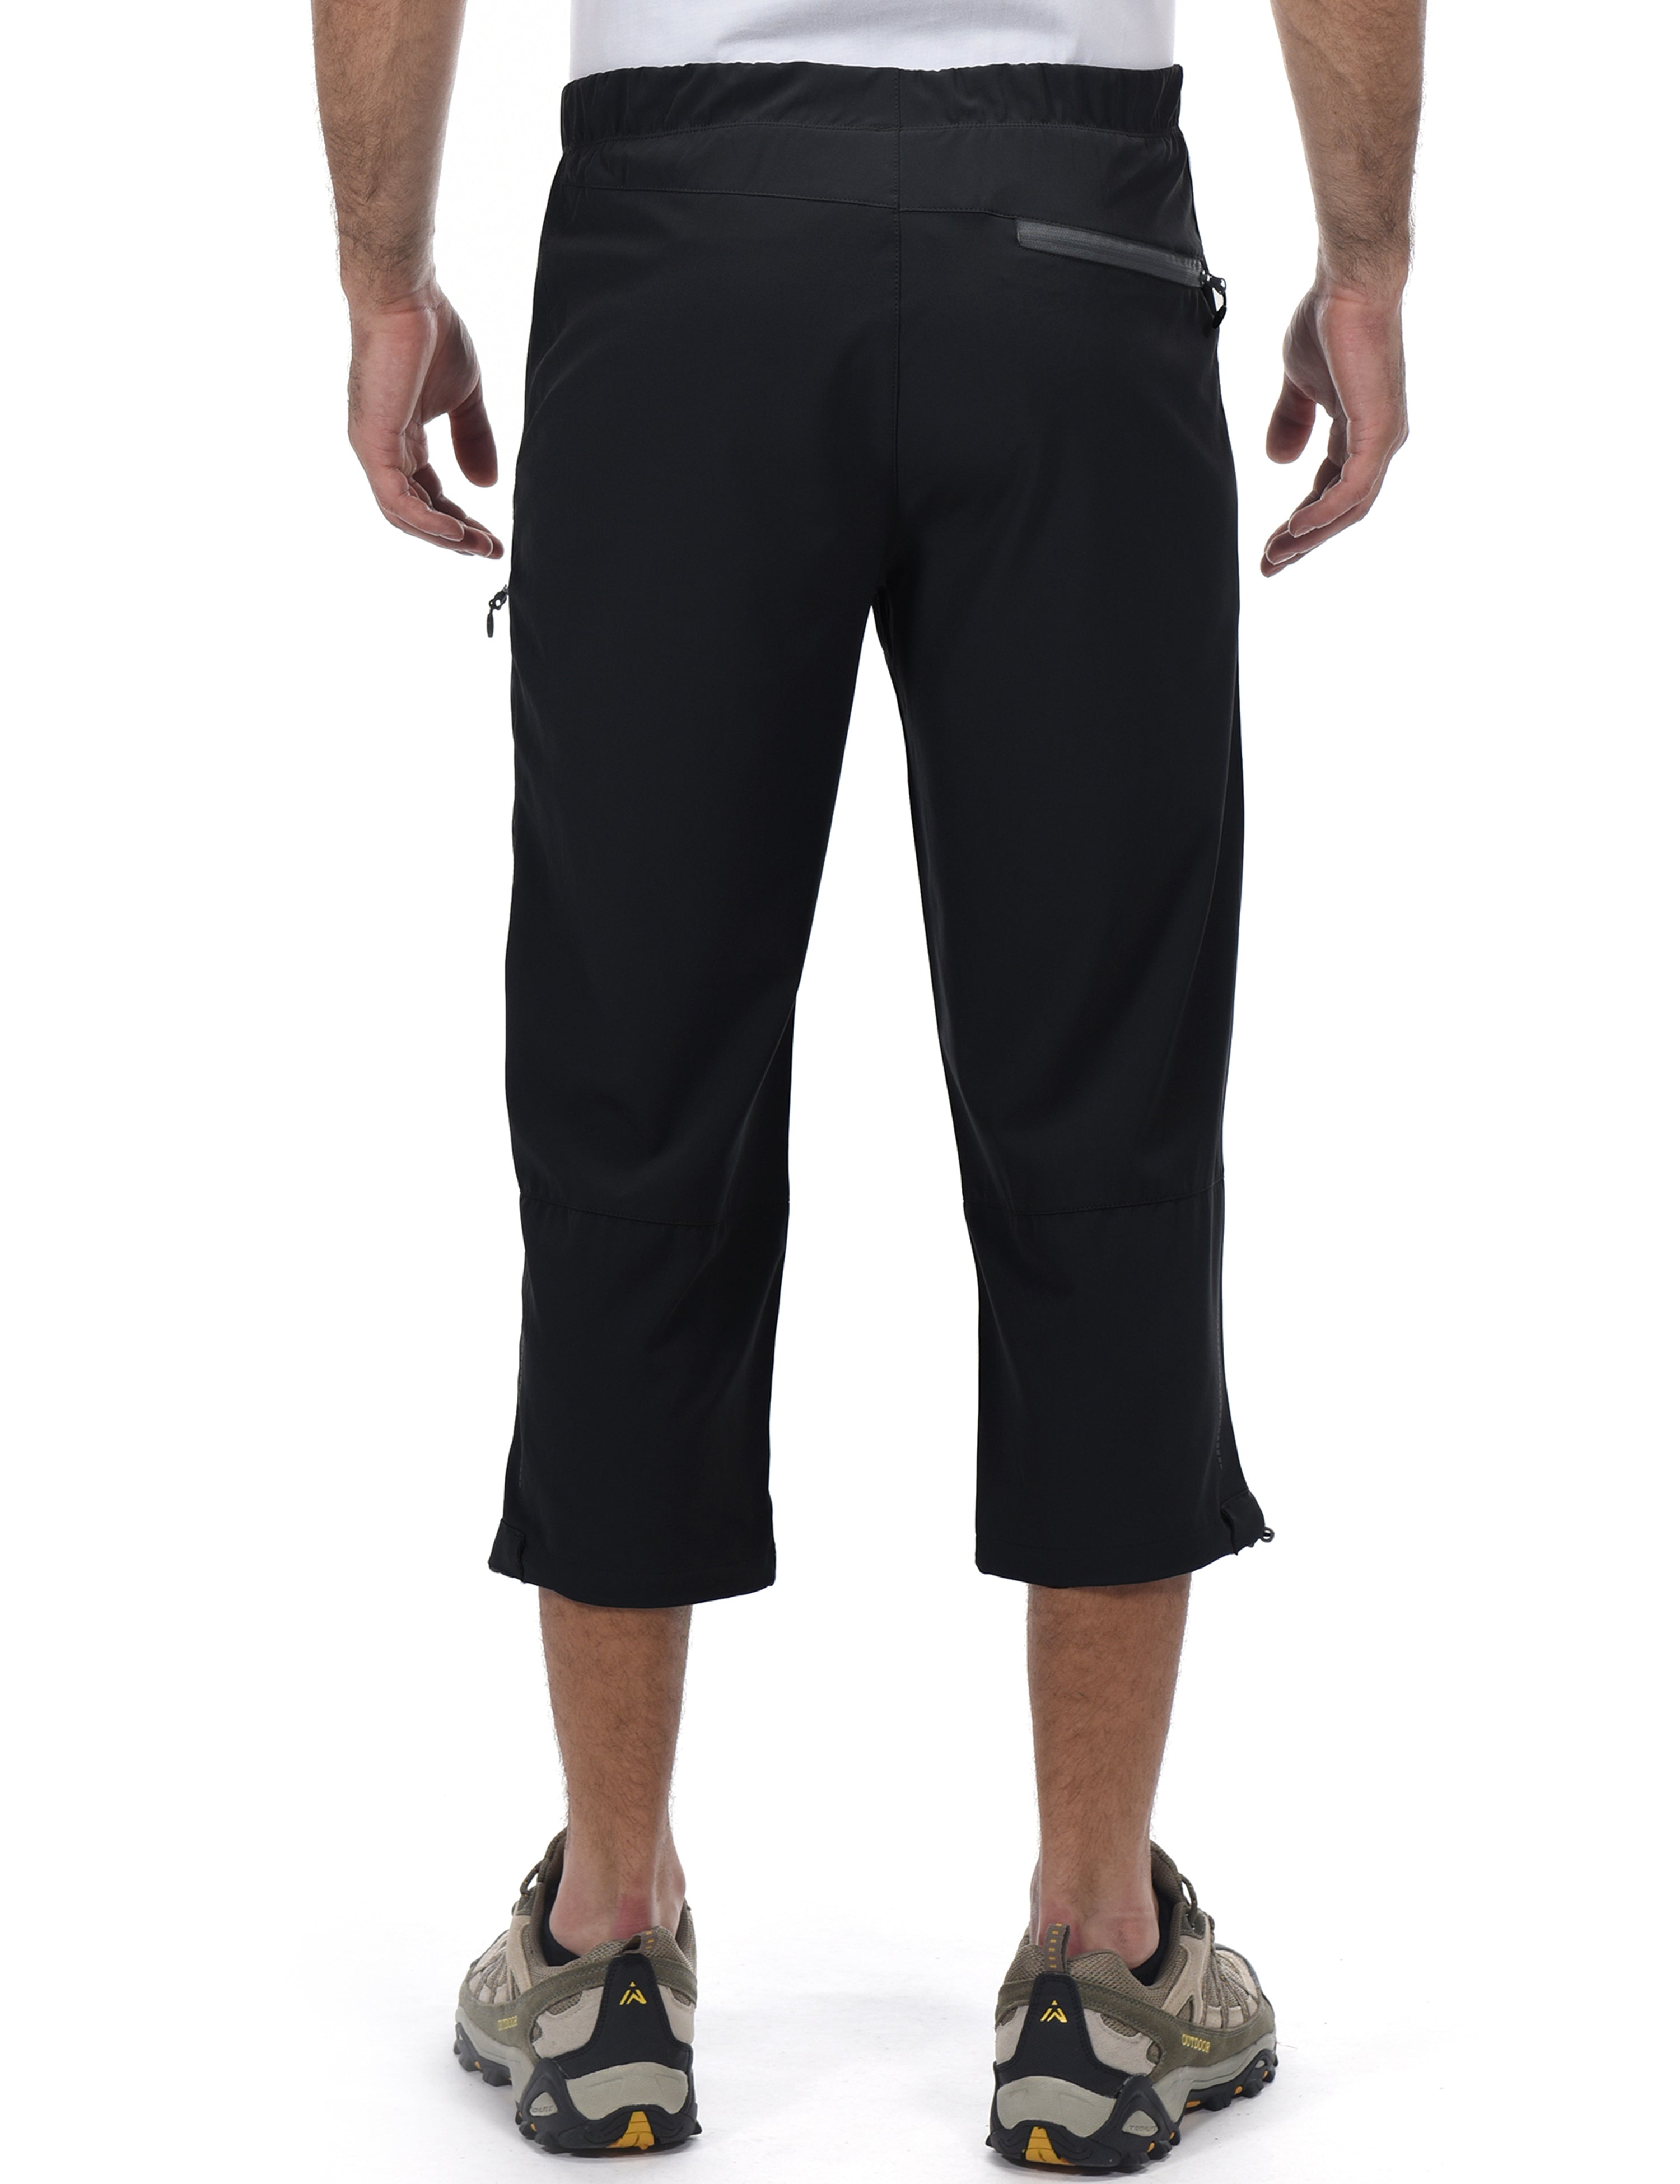 Buy ZEFFIT Three quarter pants for men | Men's Shorts New Stylish Running  Cotton Blend | Men's Shorts Three Fourths Pack of 3 - Black, Grey & Navy  Online at Best Prices in India - JioMart.